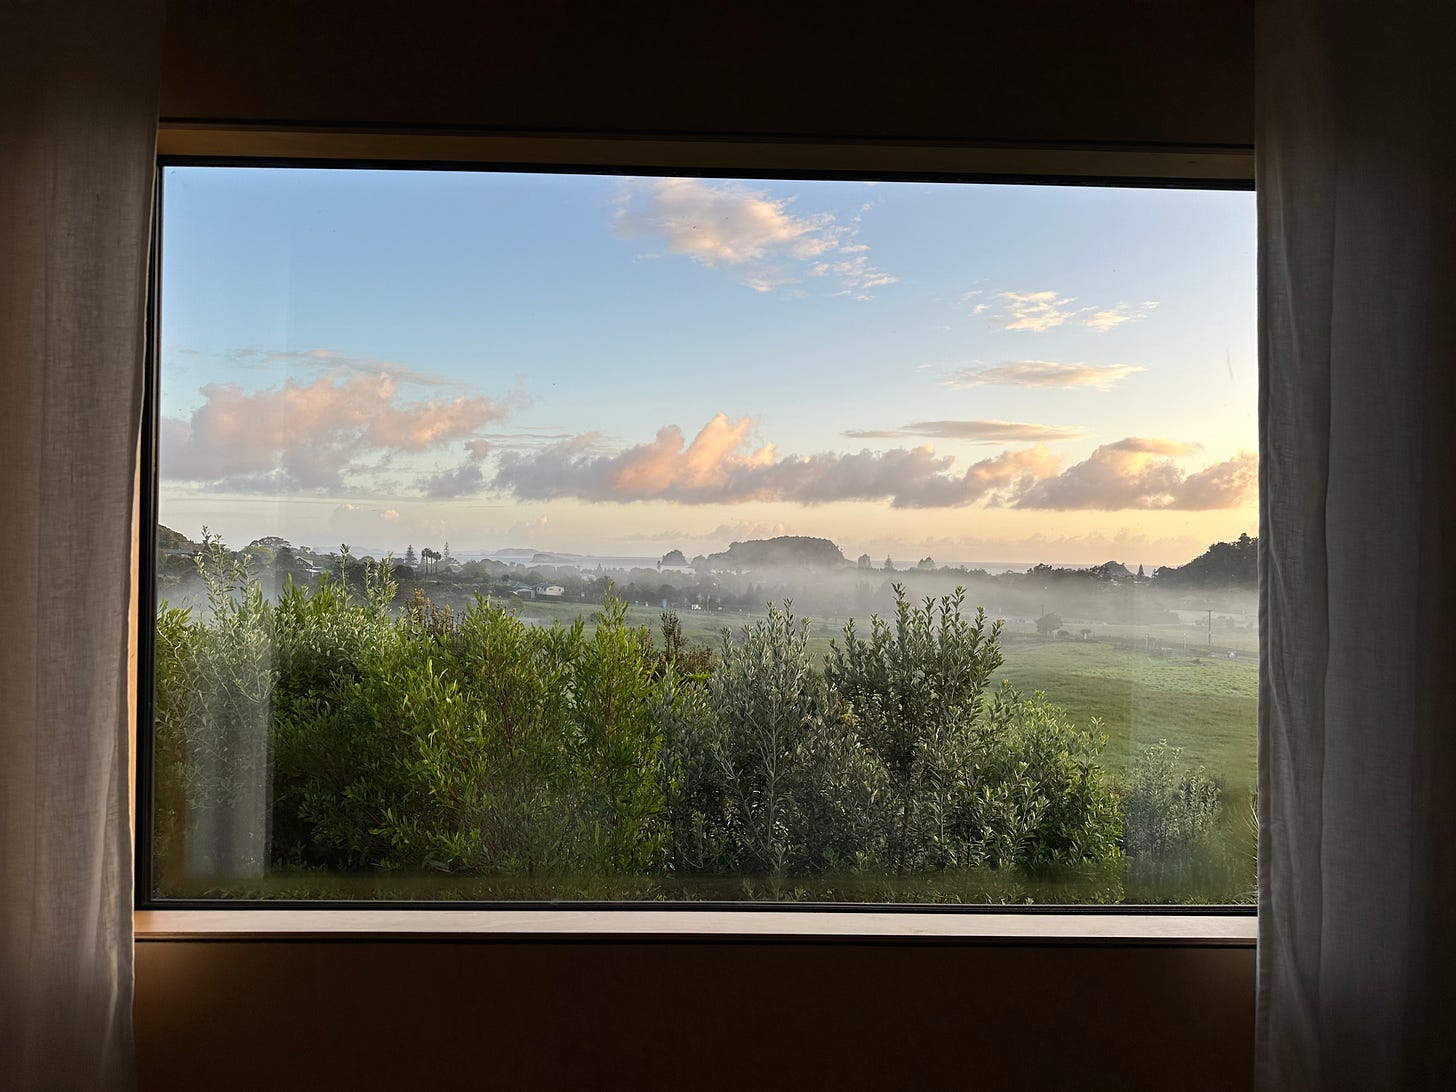 Early morning view from a bedroom window. Just after sunrise, pink clouds in a light blue sky and native bush over marshland. Mist hovers over the grasses.